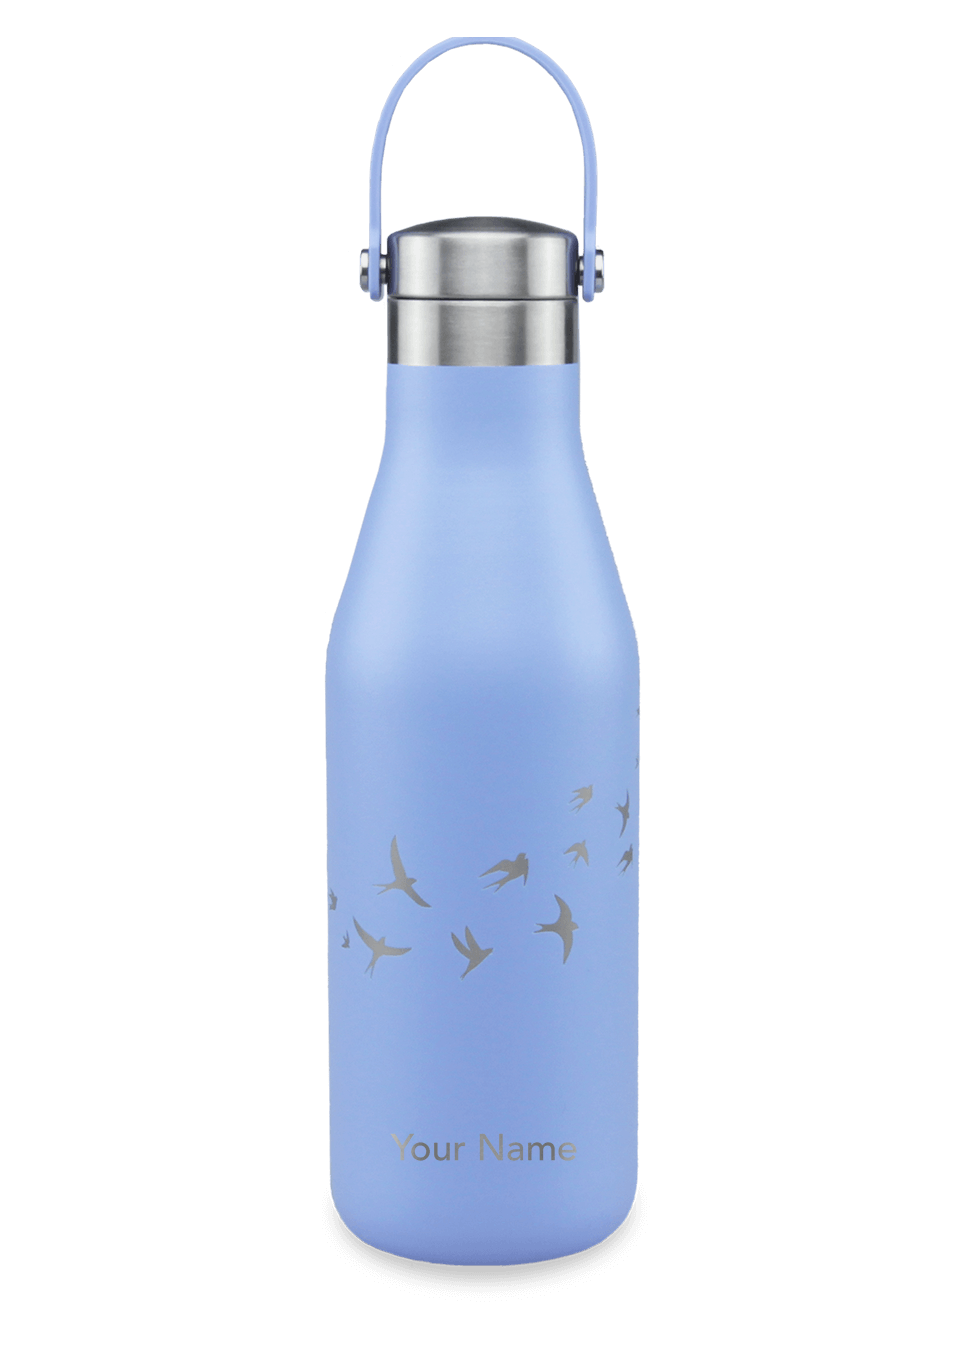 Ohelo Personalised Water Bottle in Blue with Birds Pattern